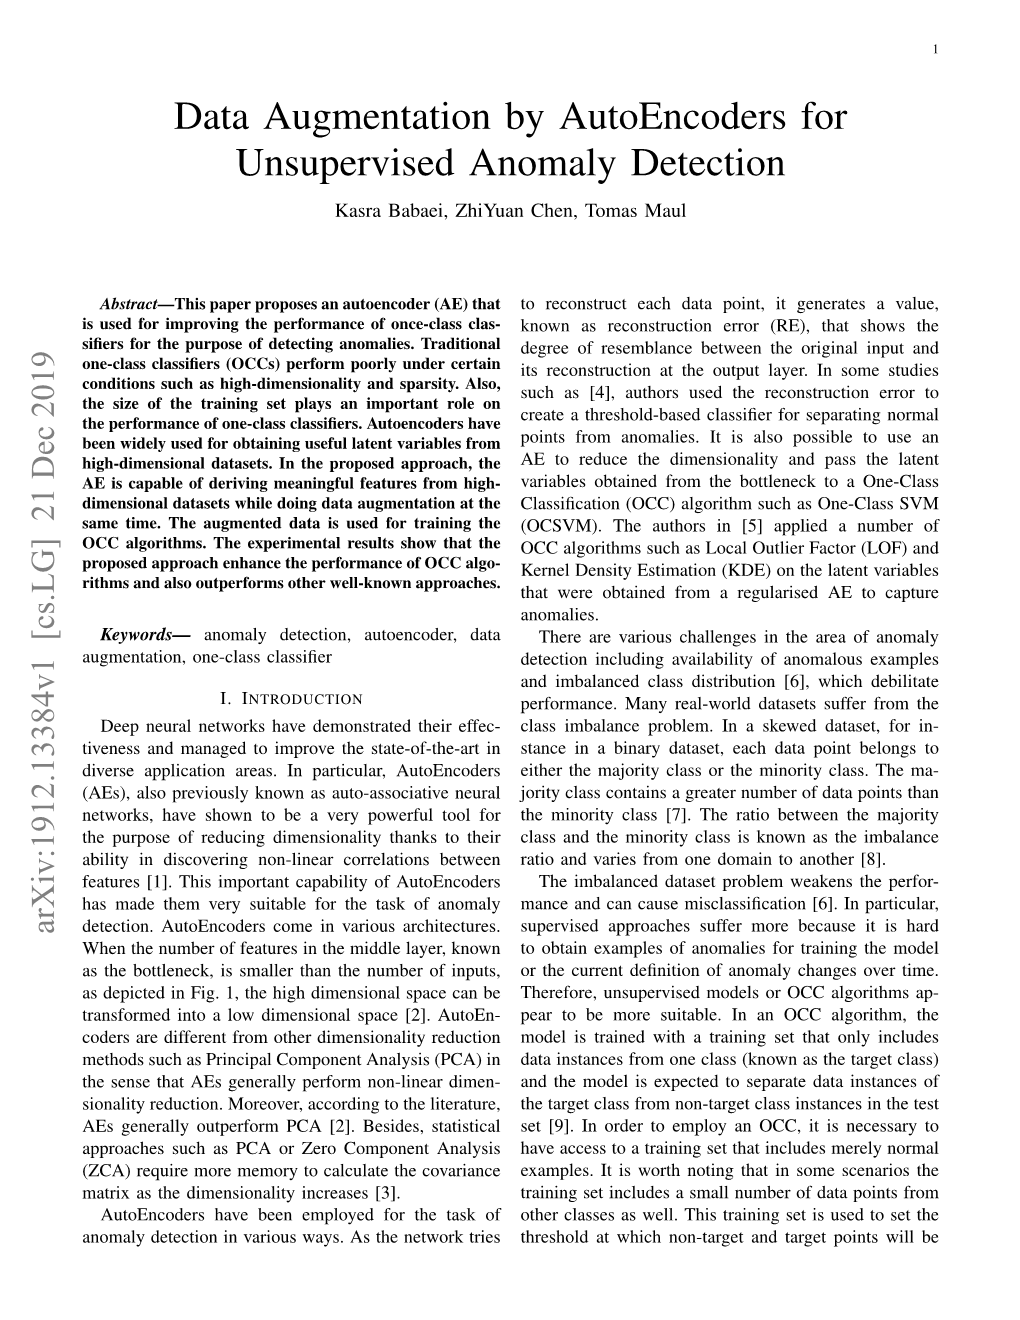 Data Augmentation by Autoencoders for Unsupervised Anomaly Detection Kasra Babaei, Zhiyuan Chen, Tomas Maul